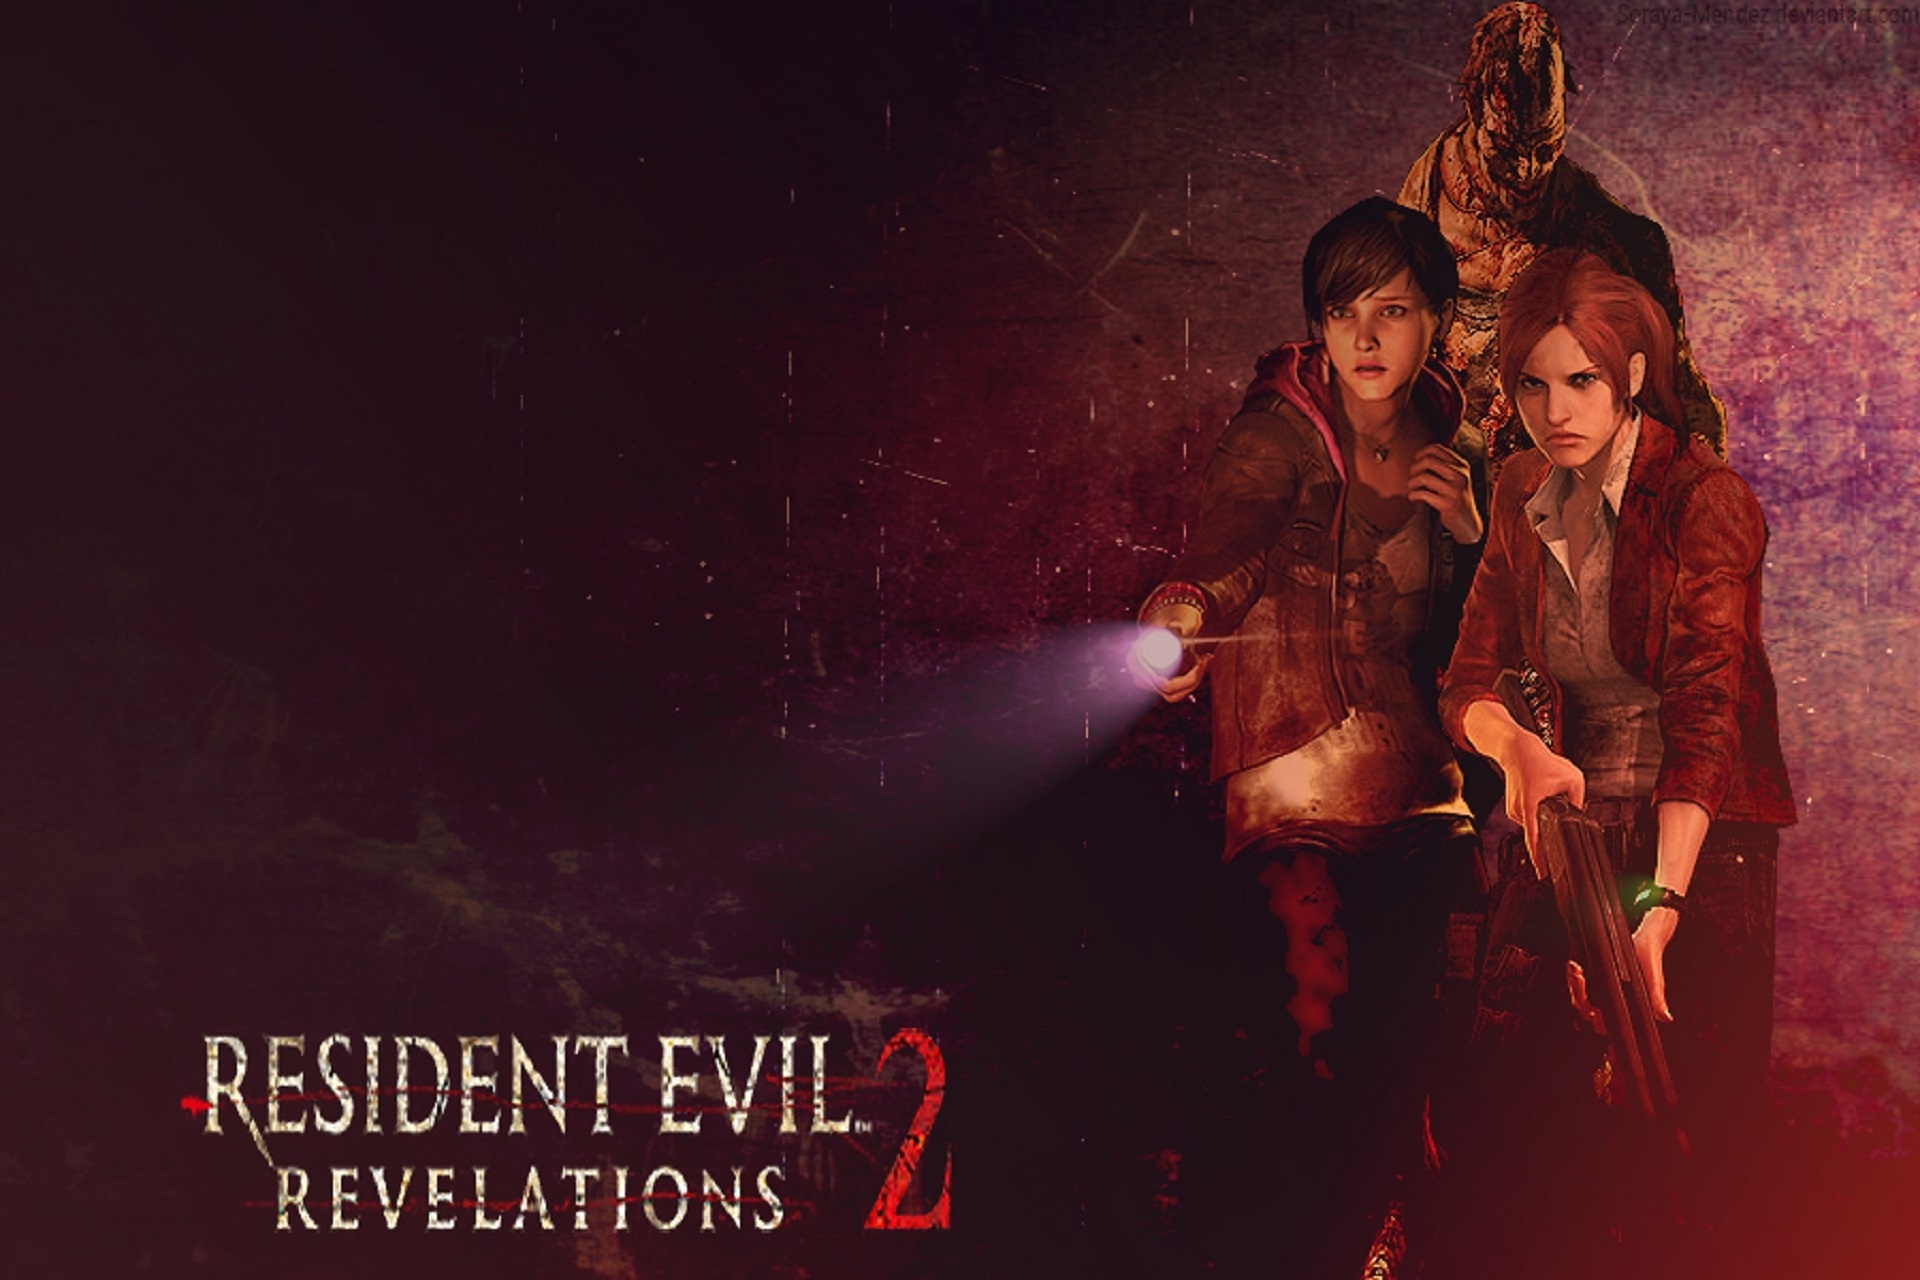 10 Top Resident Evil 2 Wallpapers FULL HD 1920×1080 For PC Background 2020